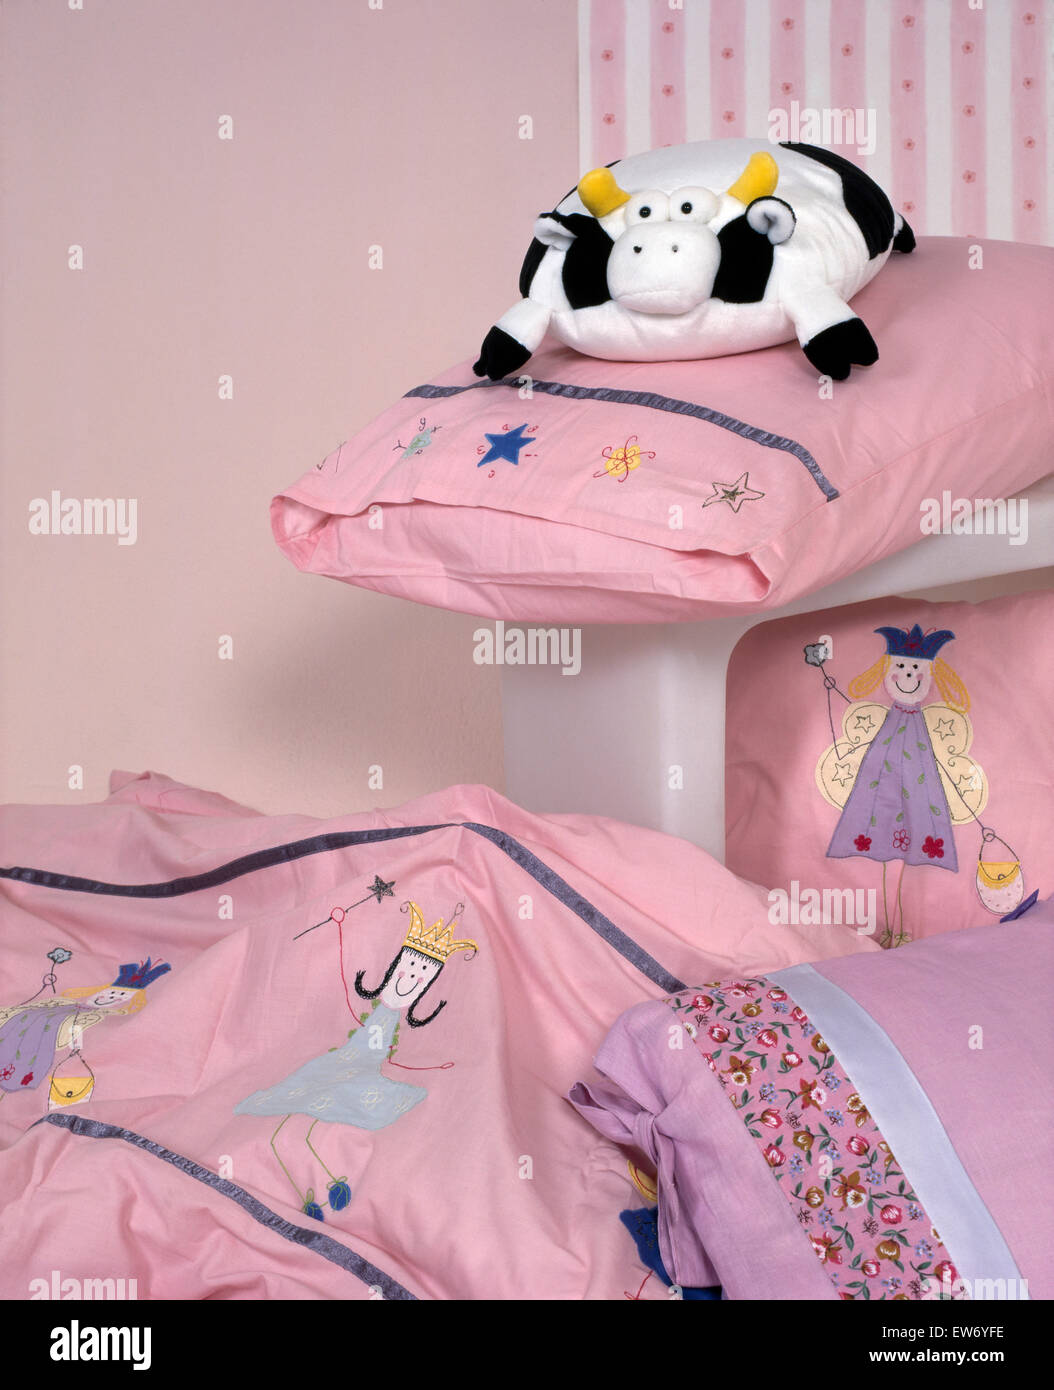 Close-up of children's embroidered pillow and duvet Stock Photo